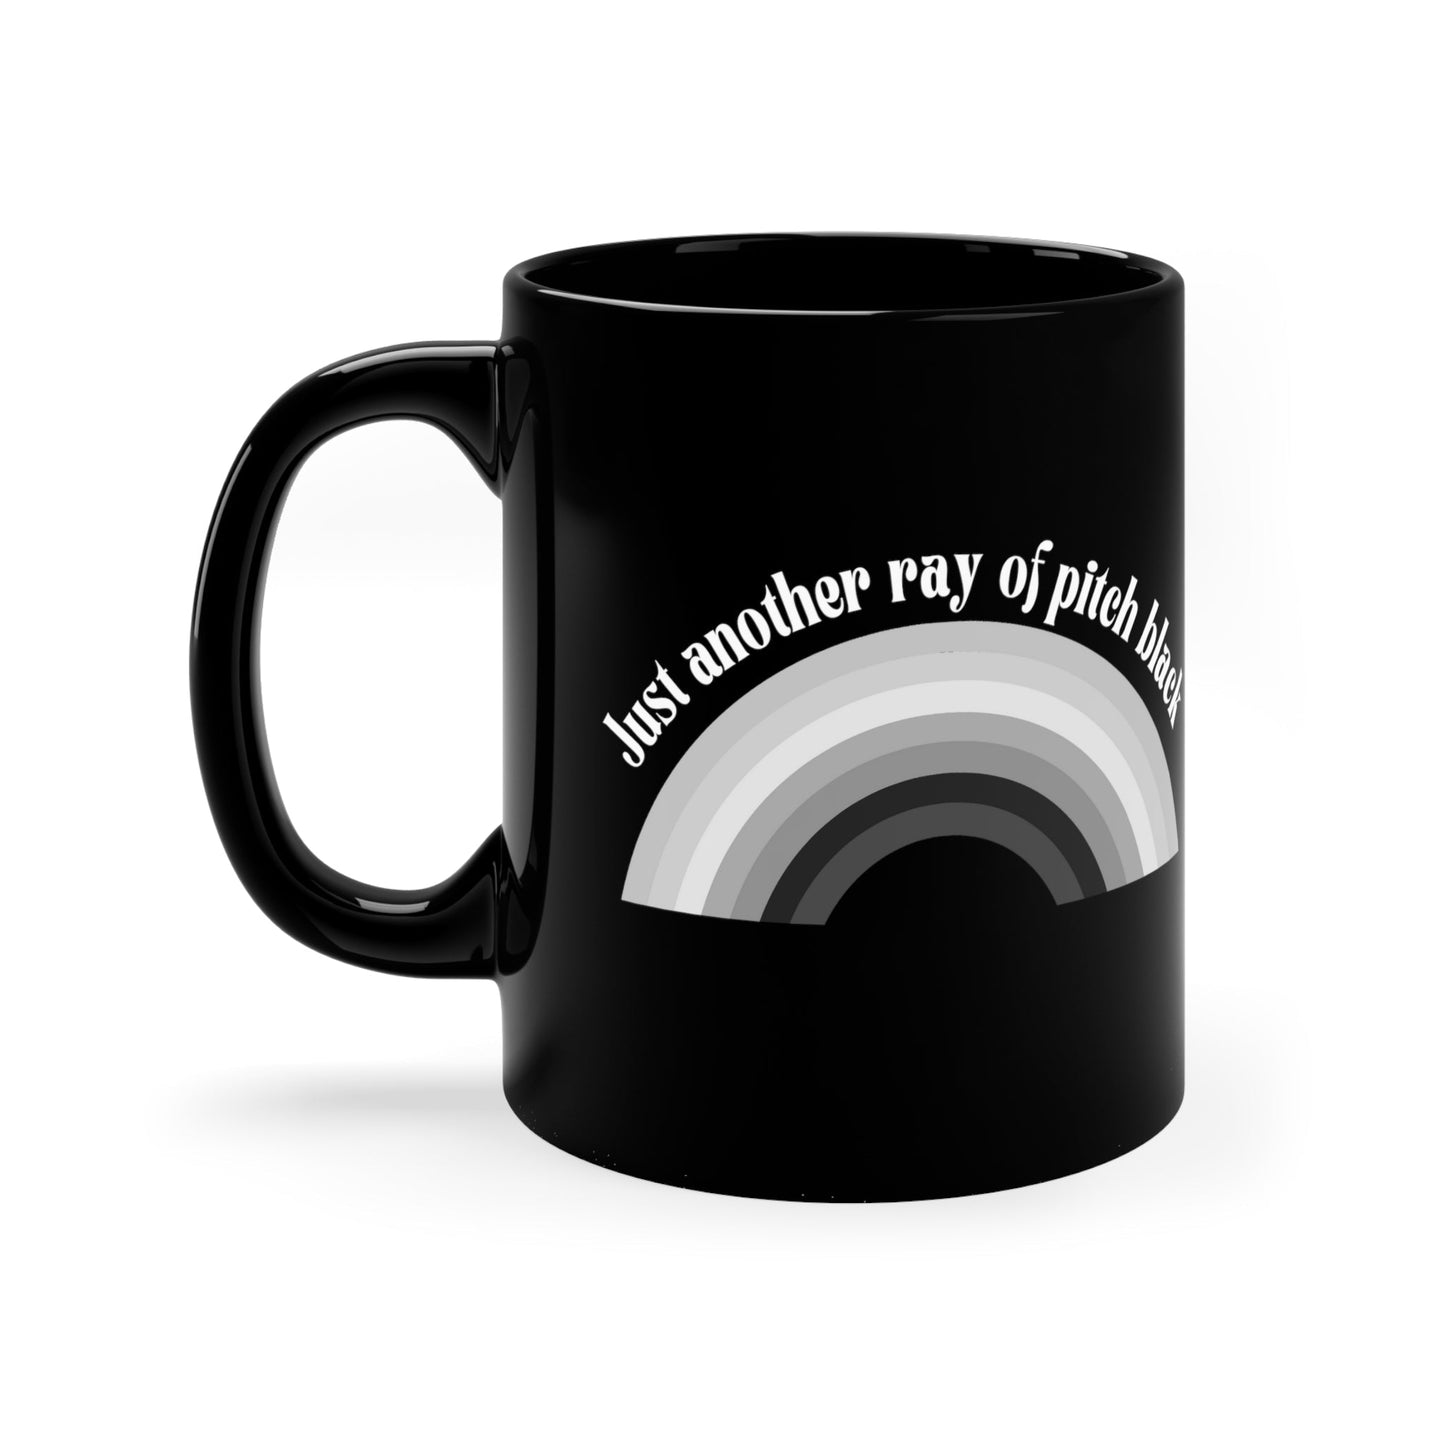 Just Another Ray of Pitch Black 11oz Black Mug